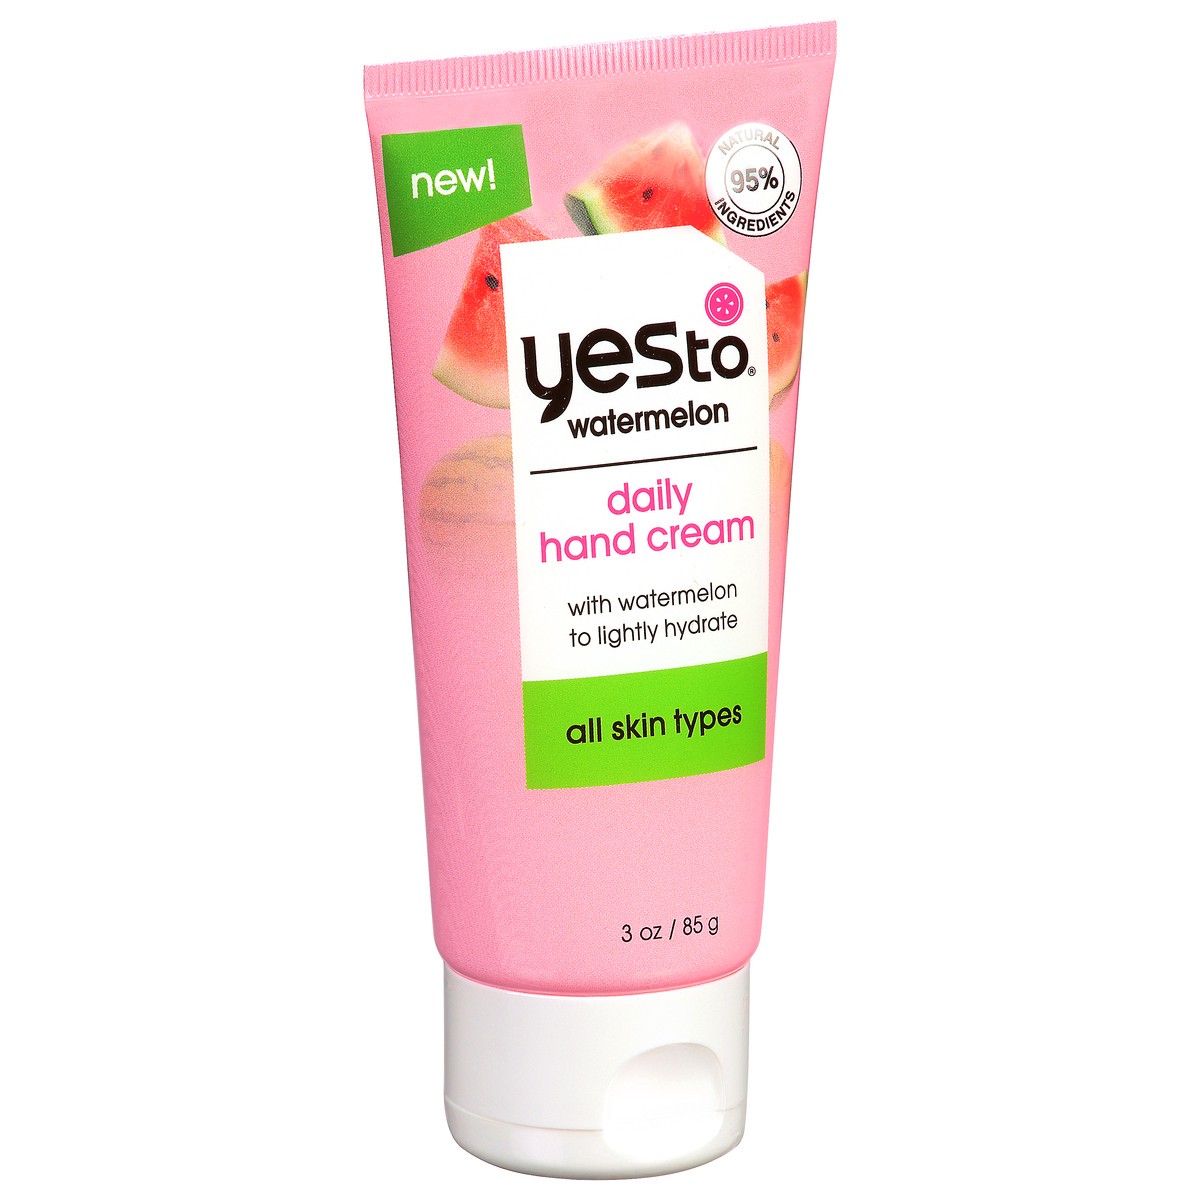 slide 2 of 11, Yes to Watermelon Daily Hand Cream 3 oz, 3 oz